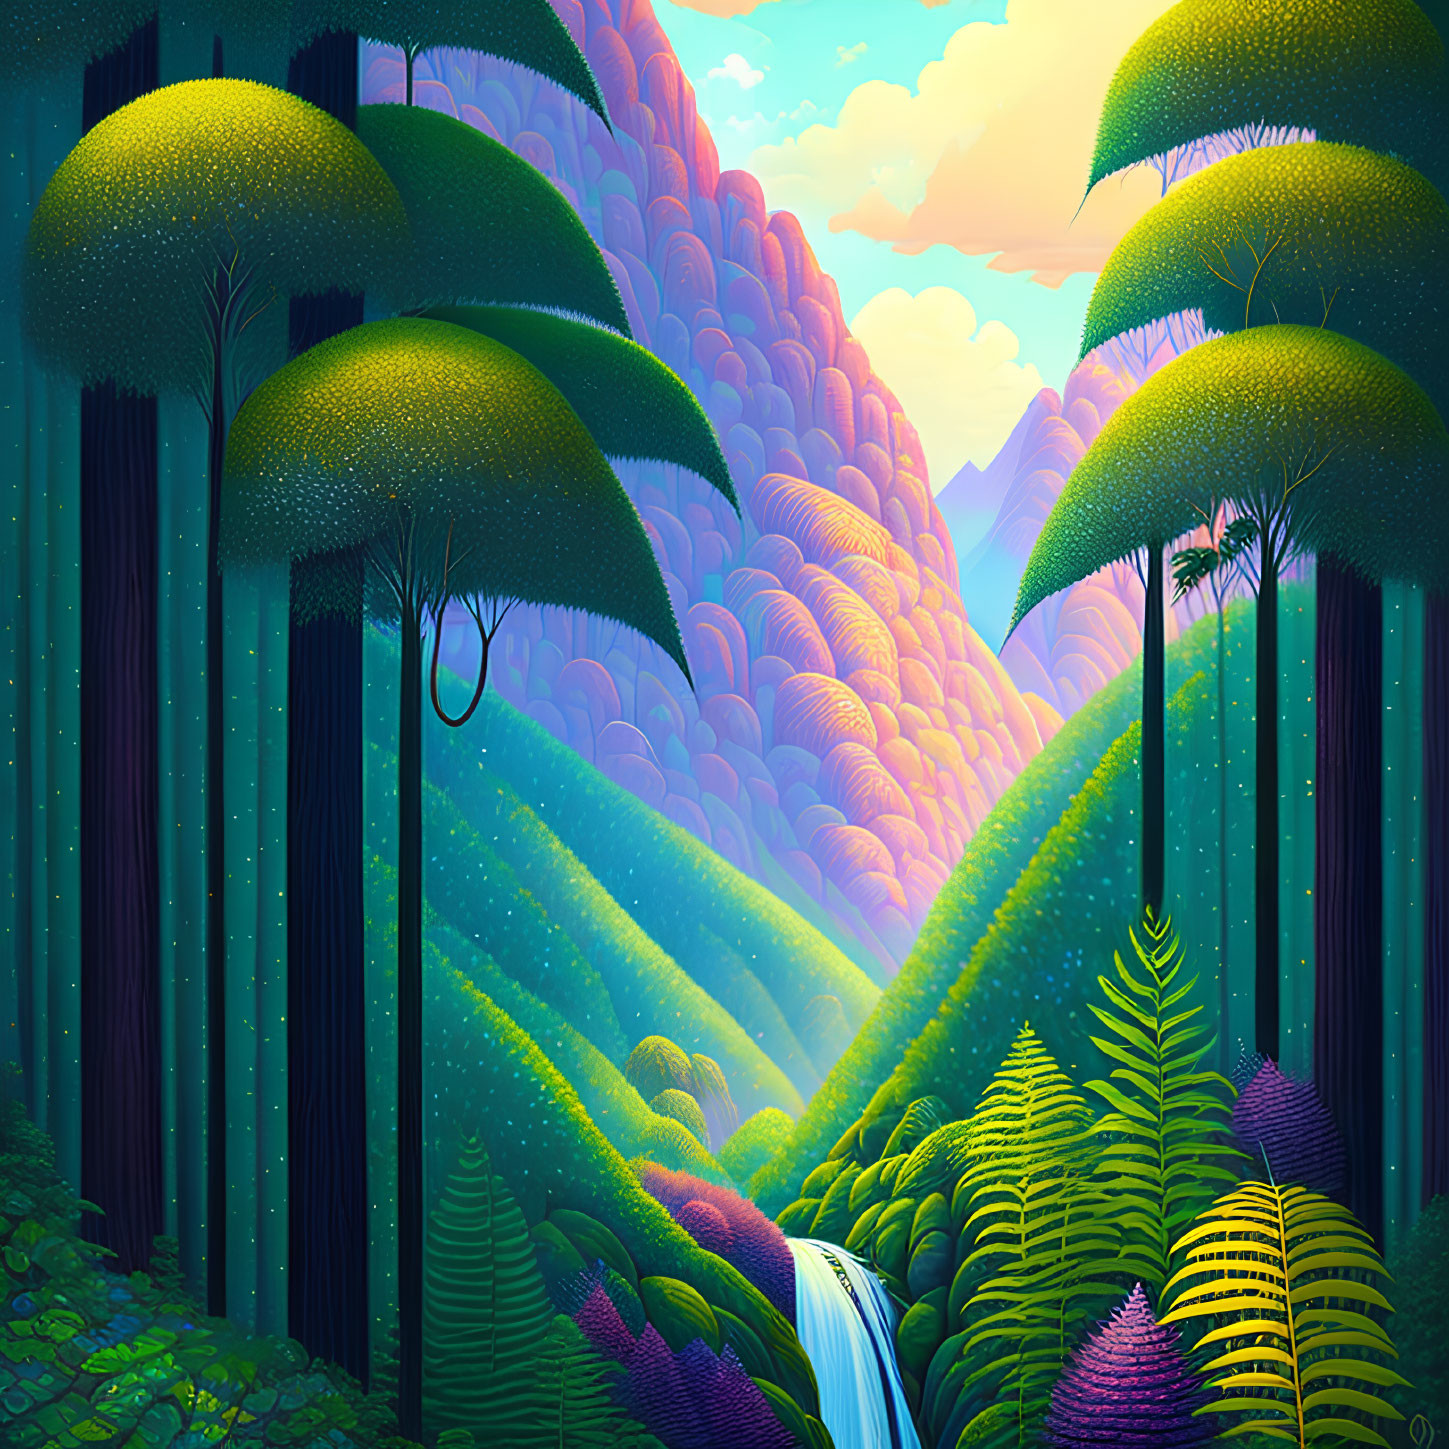 Colorful Fantasy Landscape with Oversized Tree Ferns and Waterfall